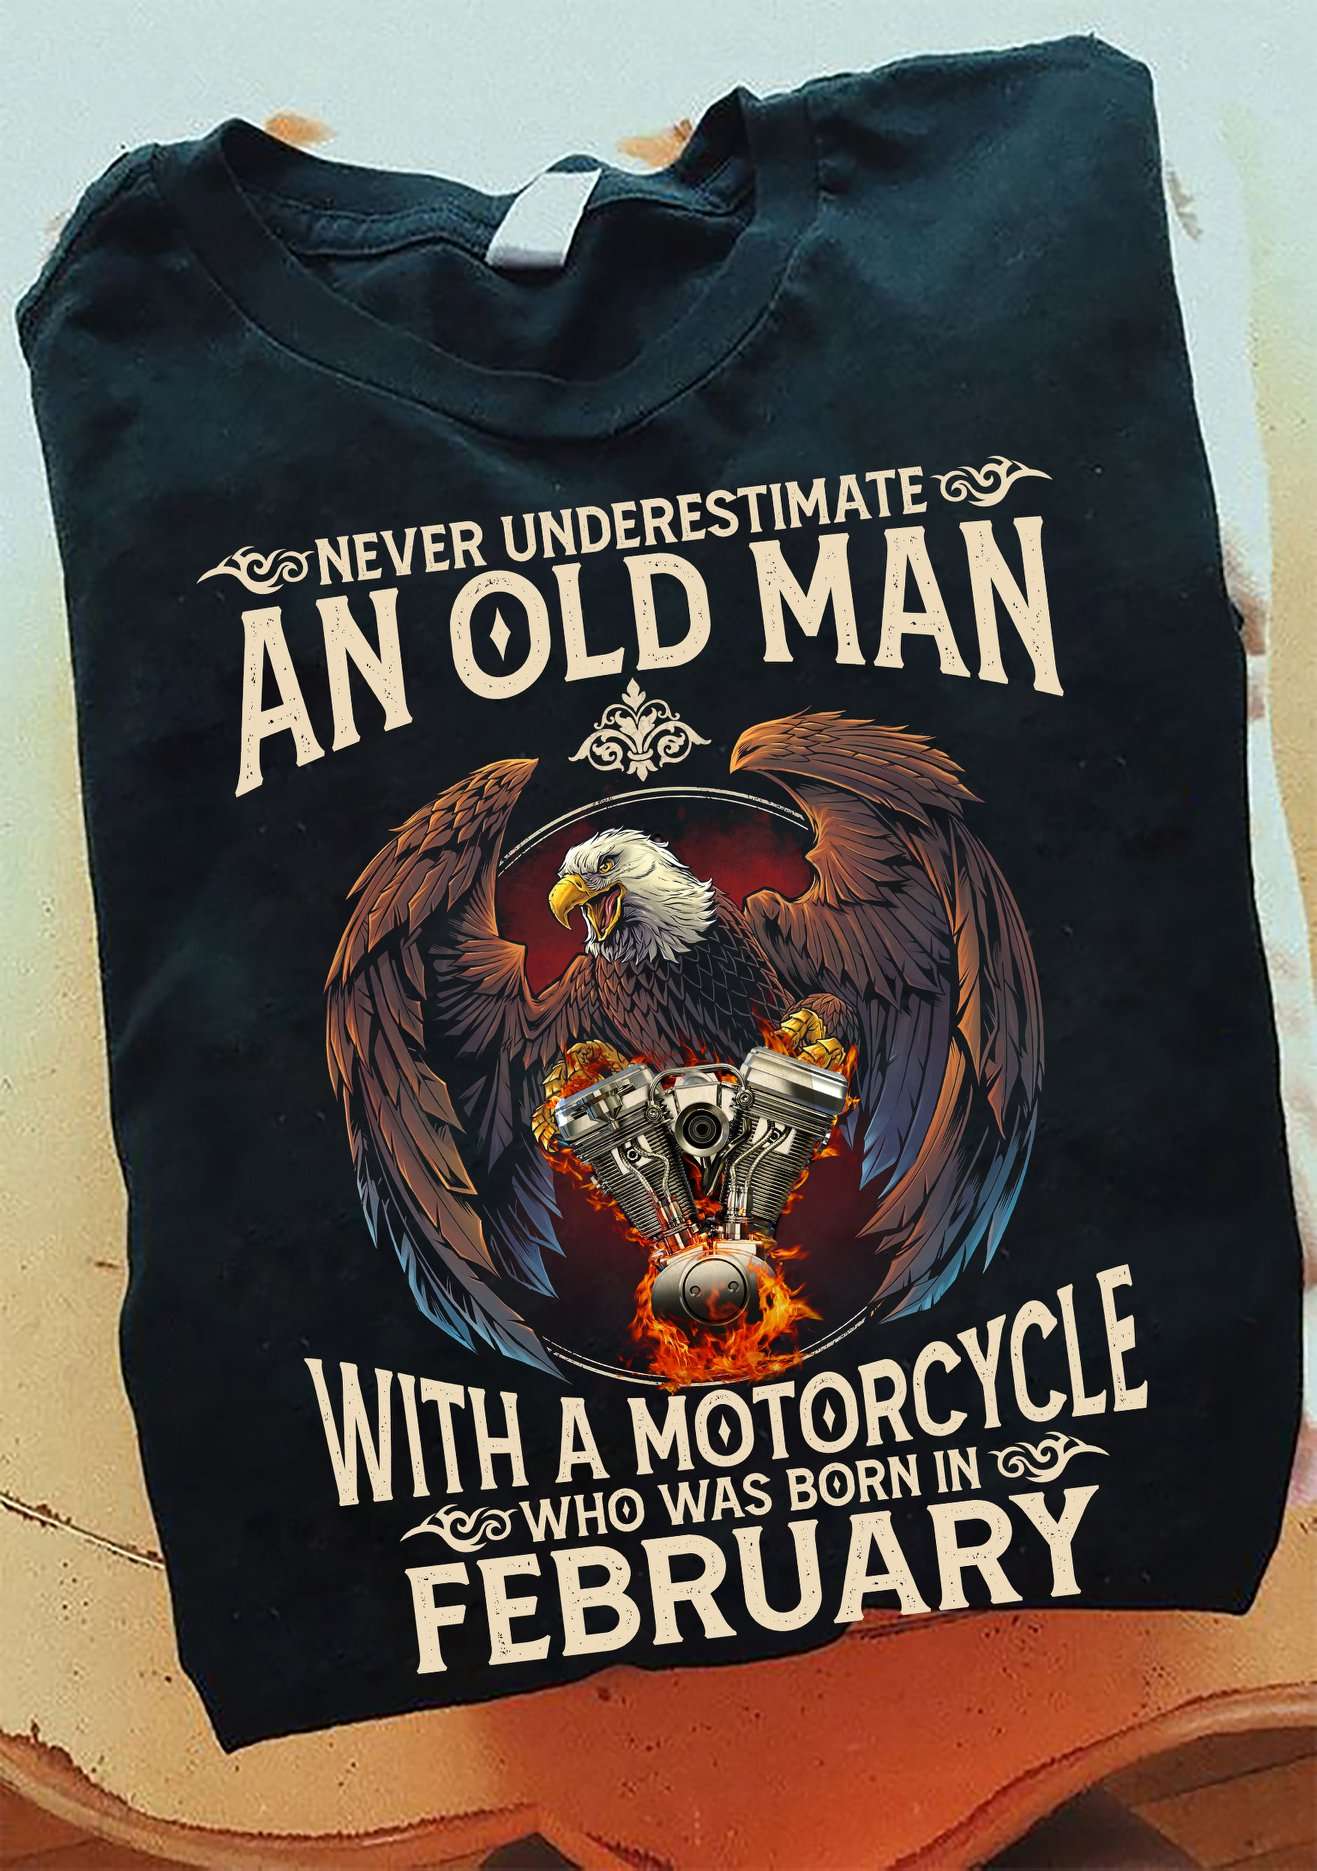 February Birthday Eagle Engine Motorcycle - Never underestimate an old man with a motorcycle who was born in february